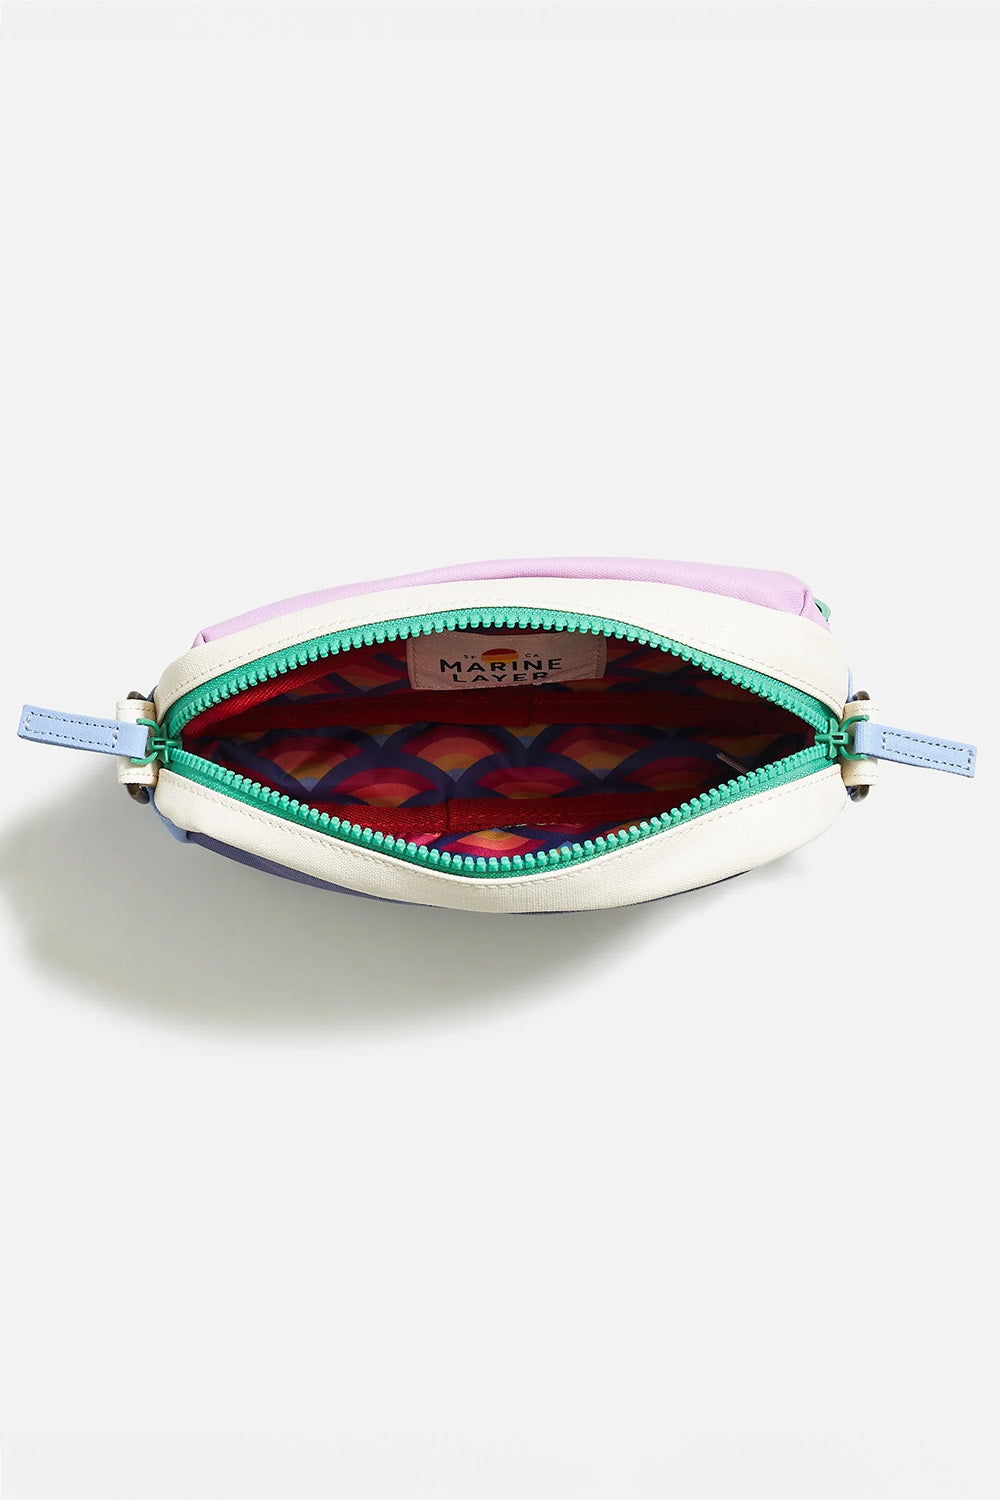 Marine Layer - Colorblock Fanny Pack - Lilac Colorblock - Inside